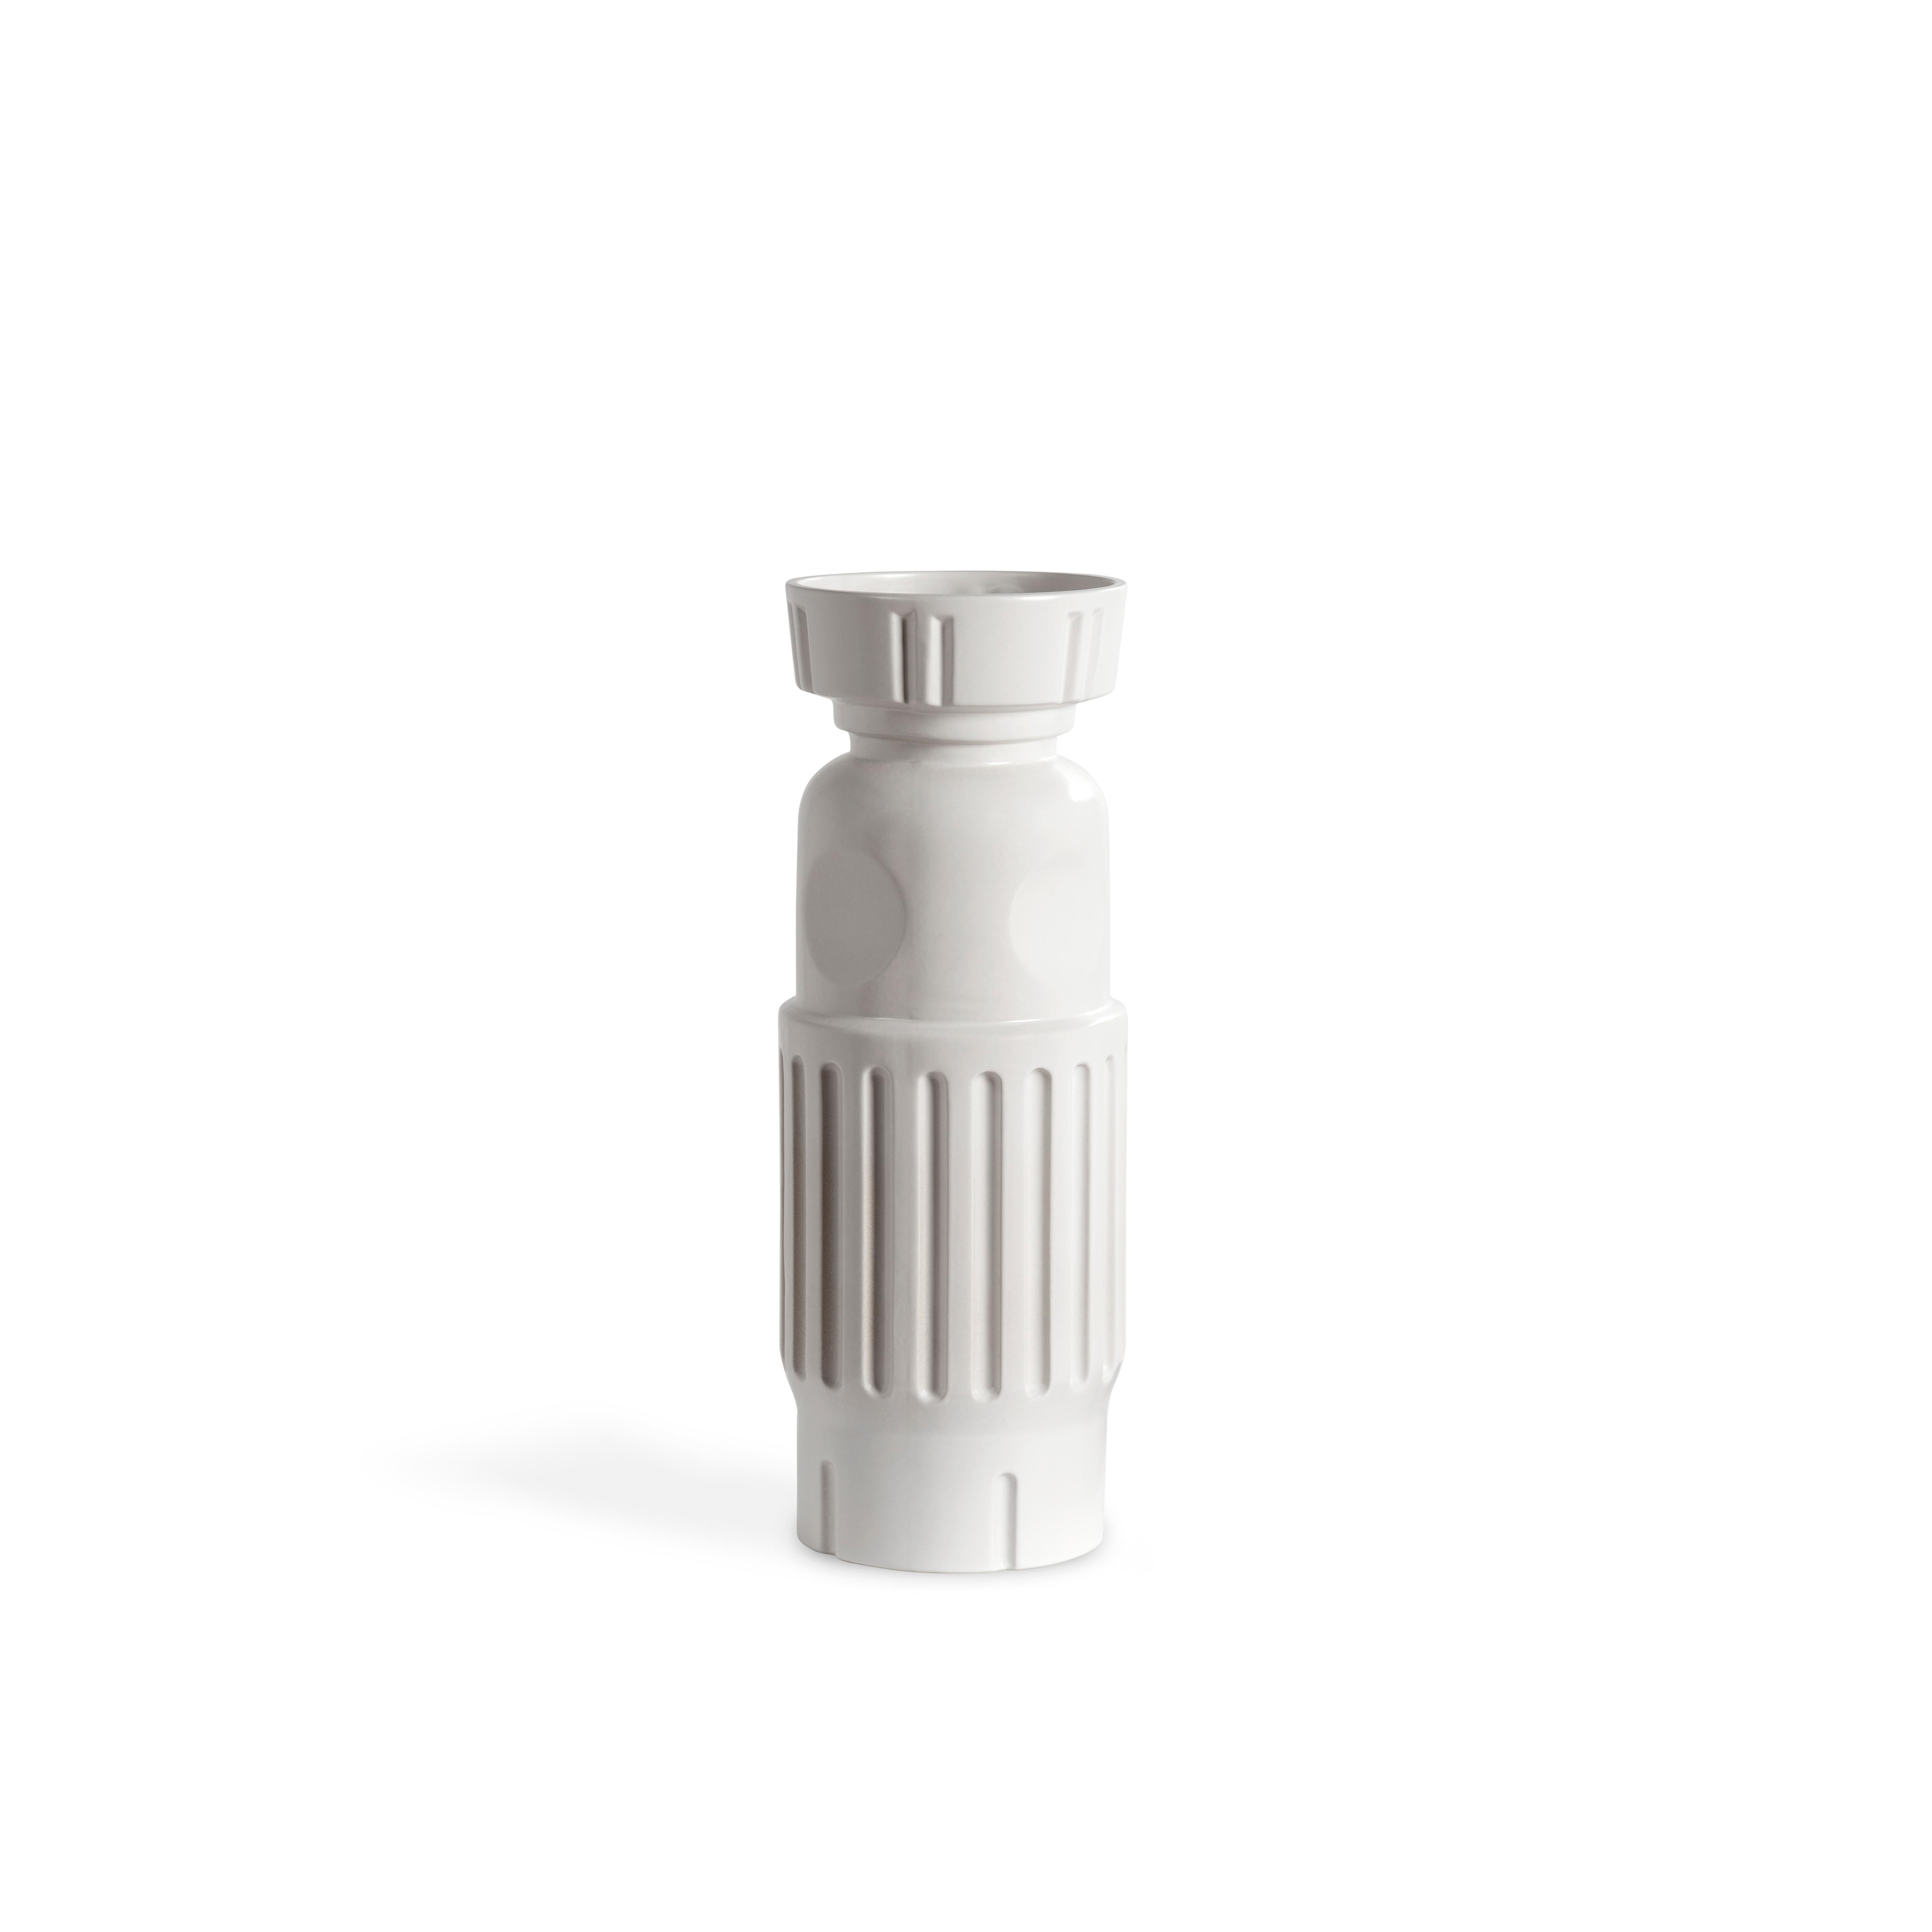 Fg 2 white vase and box by Pulpo
Dimensions: D14 x H40 cm
Materials: ceramic

Also available in different colours.

Appearing as both futuristic and an ancient relic, the fg series of ceramic objects seem to defy definition. Dutch designers